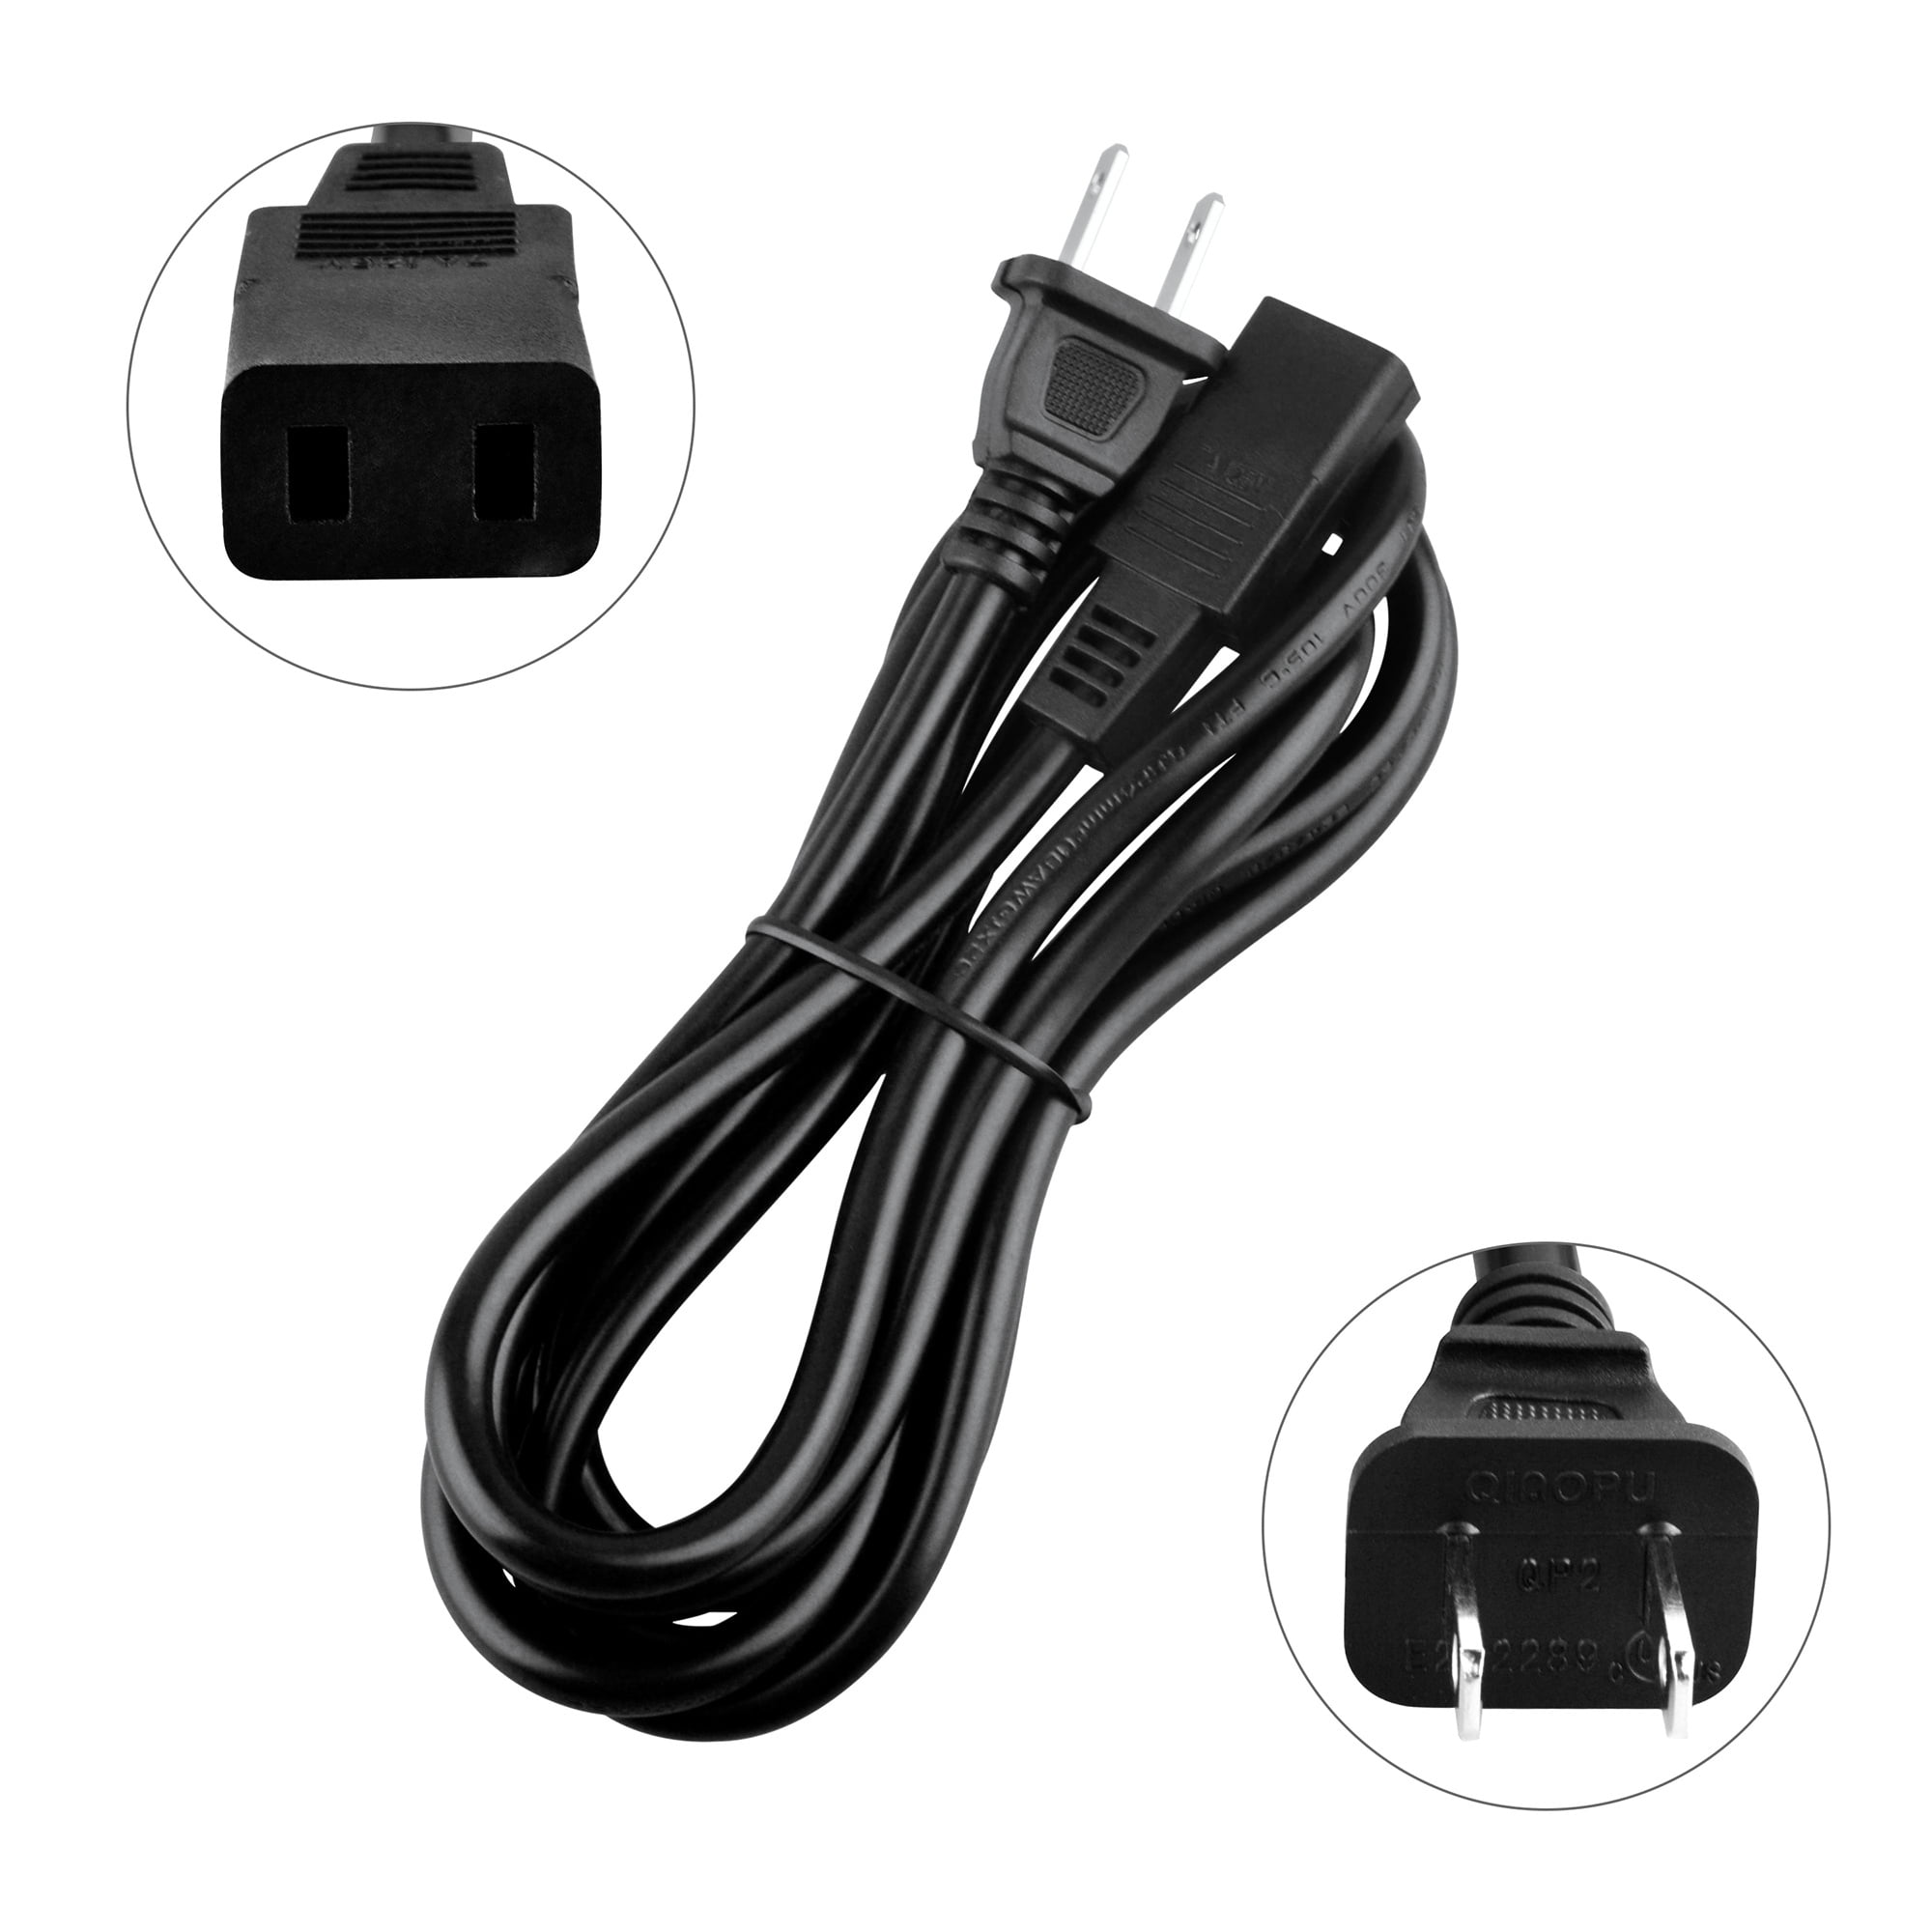 PKPOWER AC Power Cord Cable Outlet Plug Lead For BLACK & DECKER VPX VPX0310  VPX0320 DUAL PORT BATTERY CHARGER 